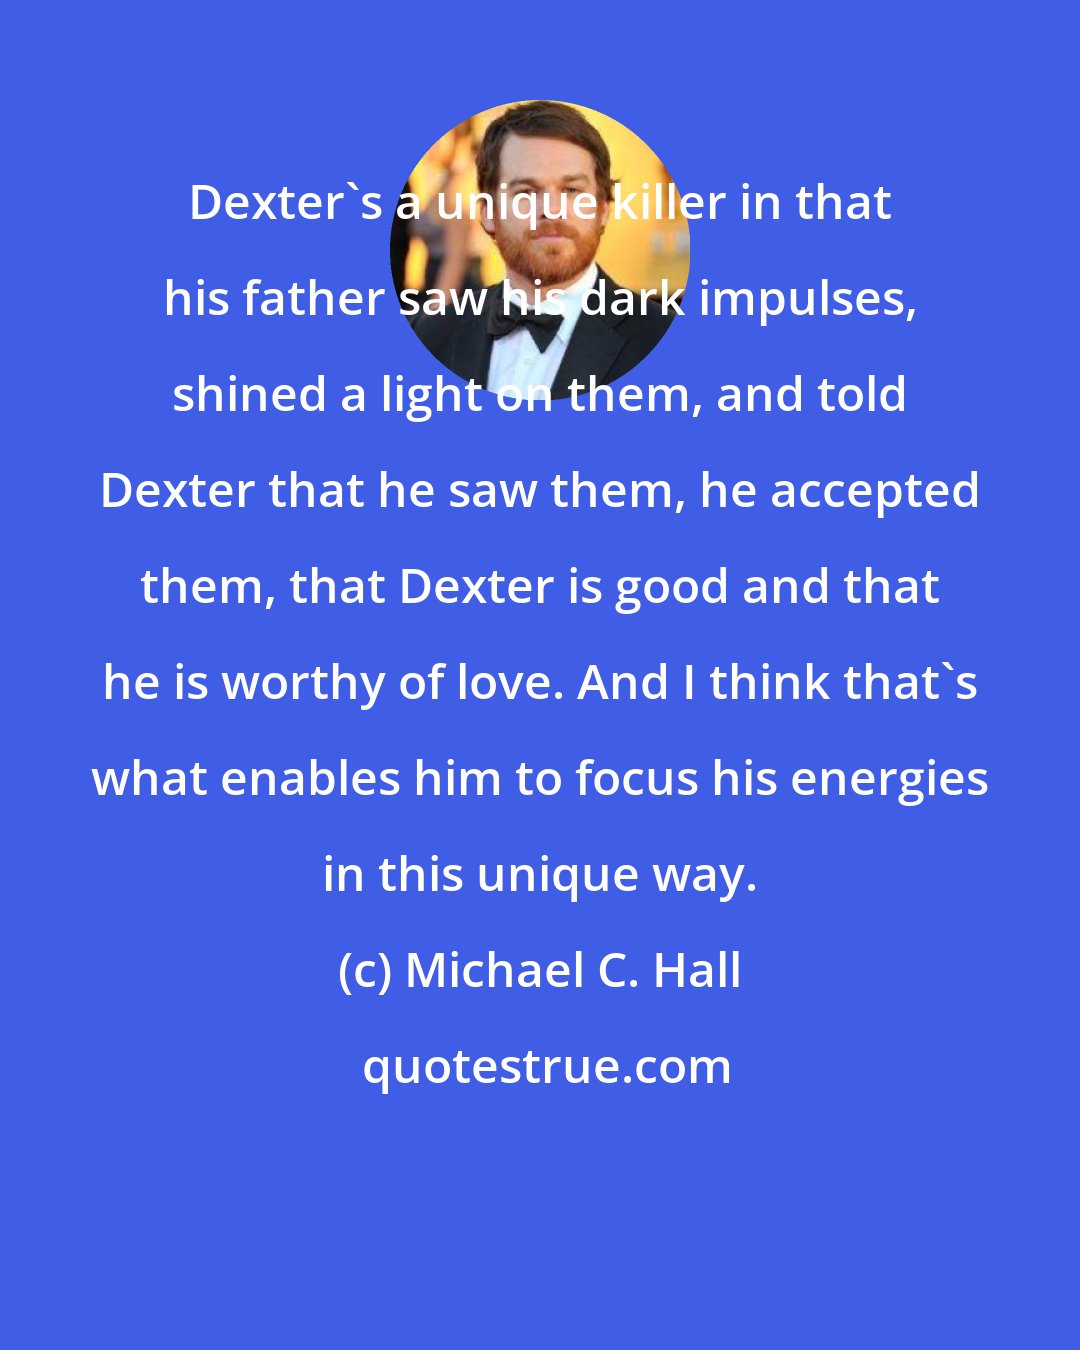 Michael C. Hall: Dexter's a unique killer in that his father saw his dark impulses, shined a light on them, and told Dexter that he saw them, he accepted them, that Dexter is good and that he is worthy of love. And I think that's what enables him to focus his energies in this unique way.